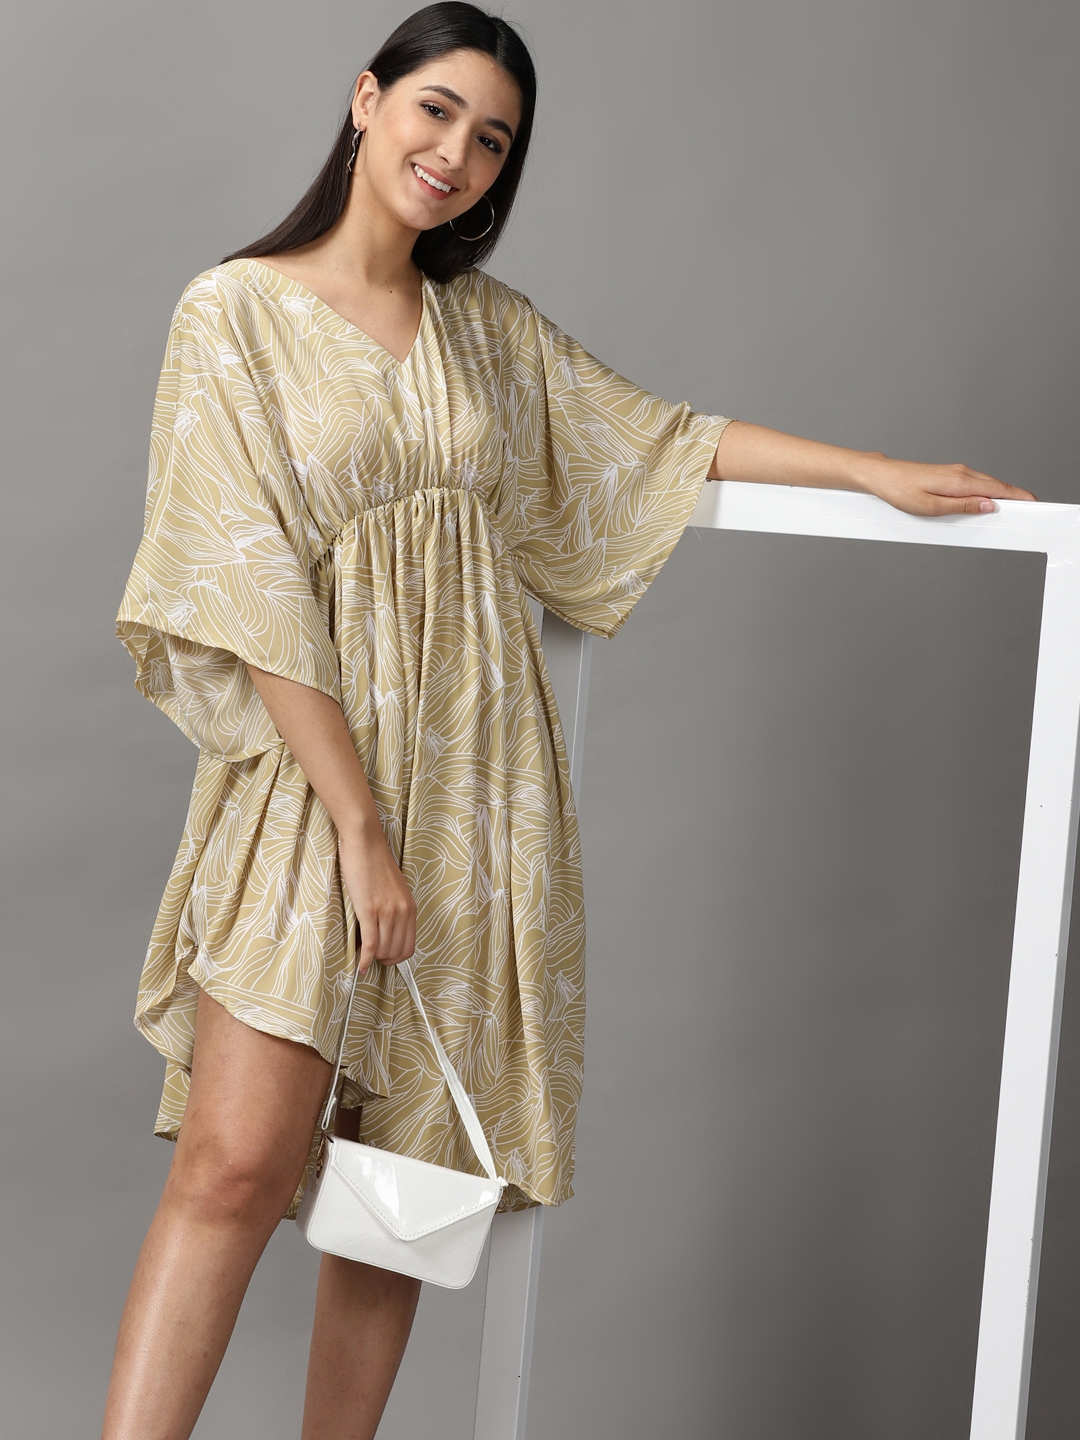 Women's Beige Polyester Printed Dresses